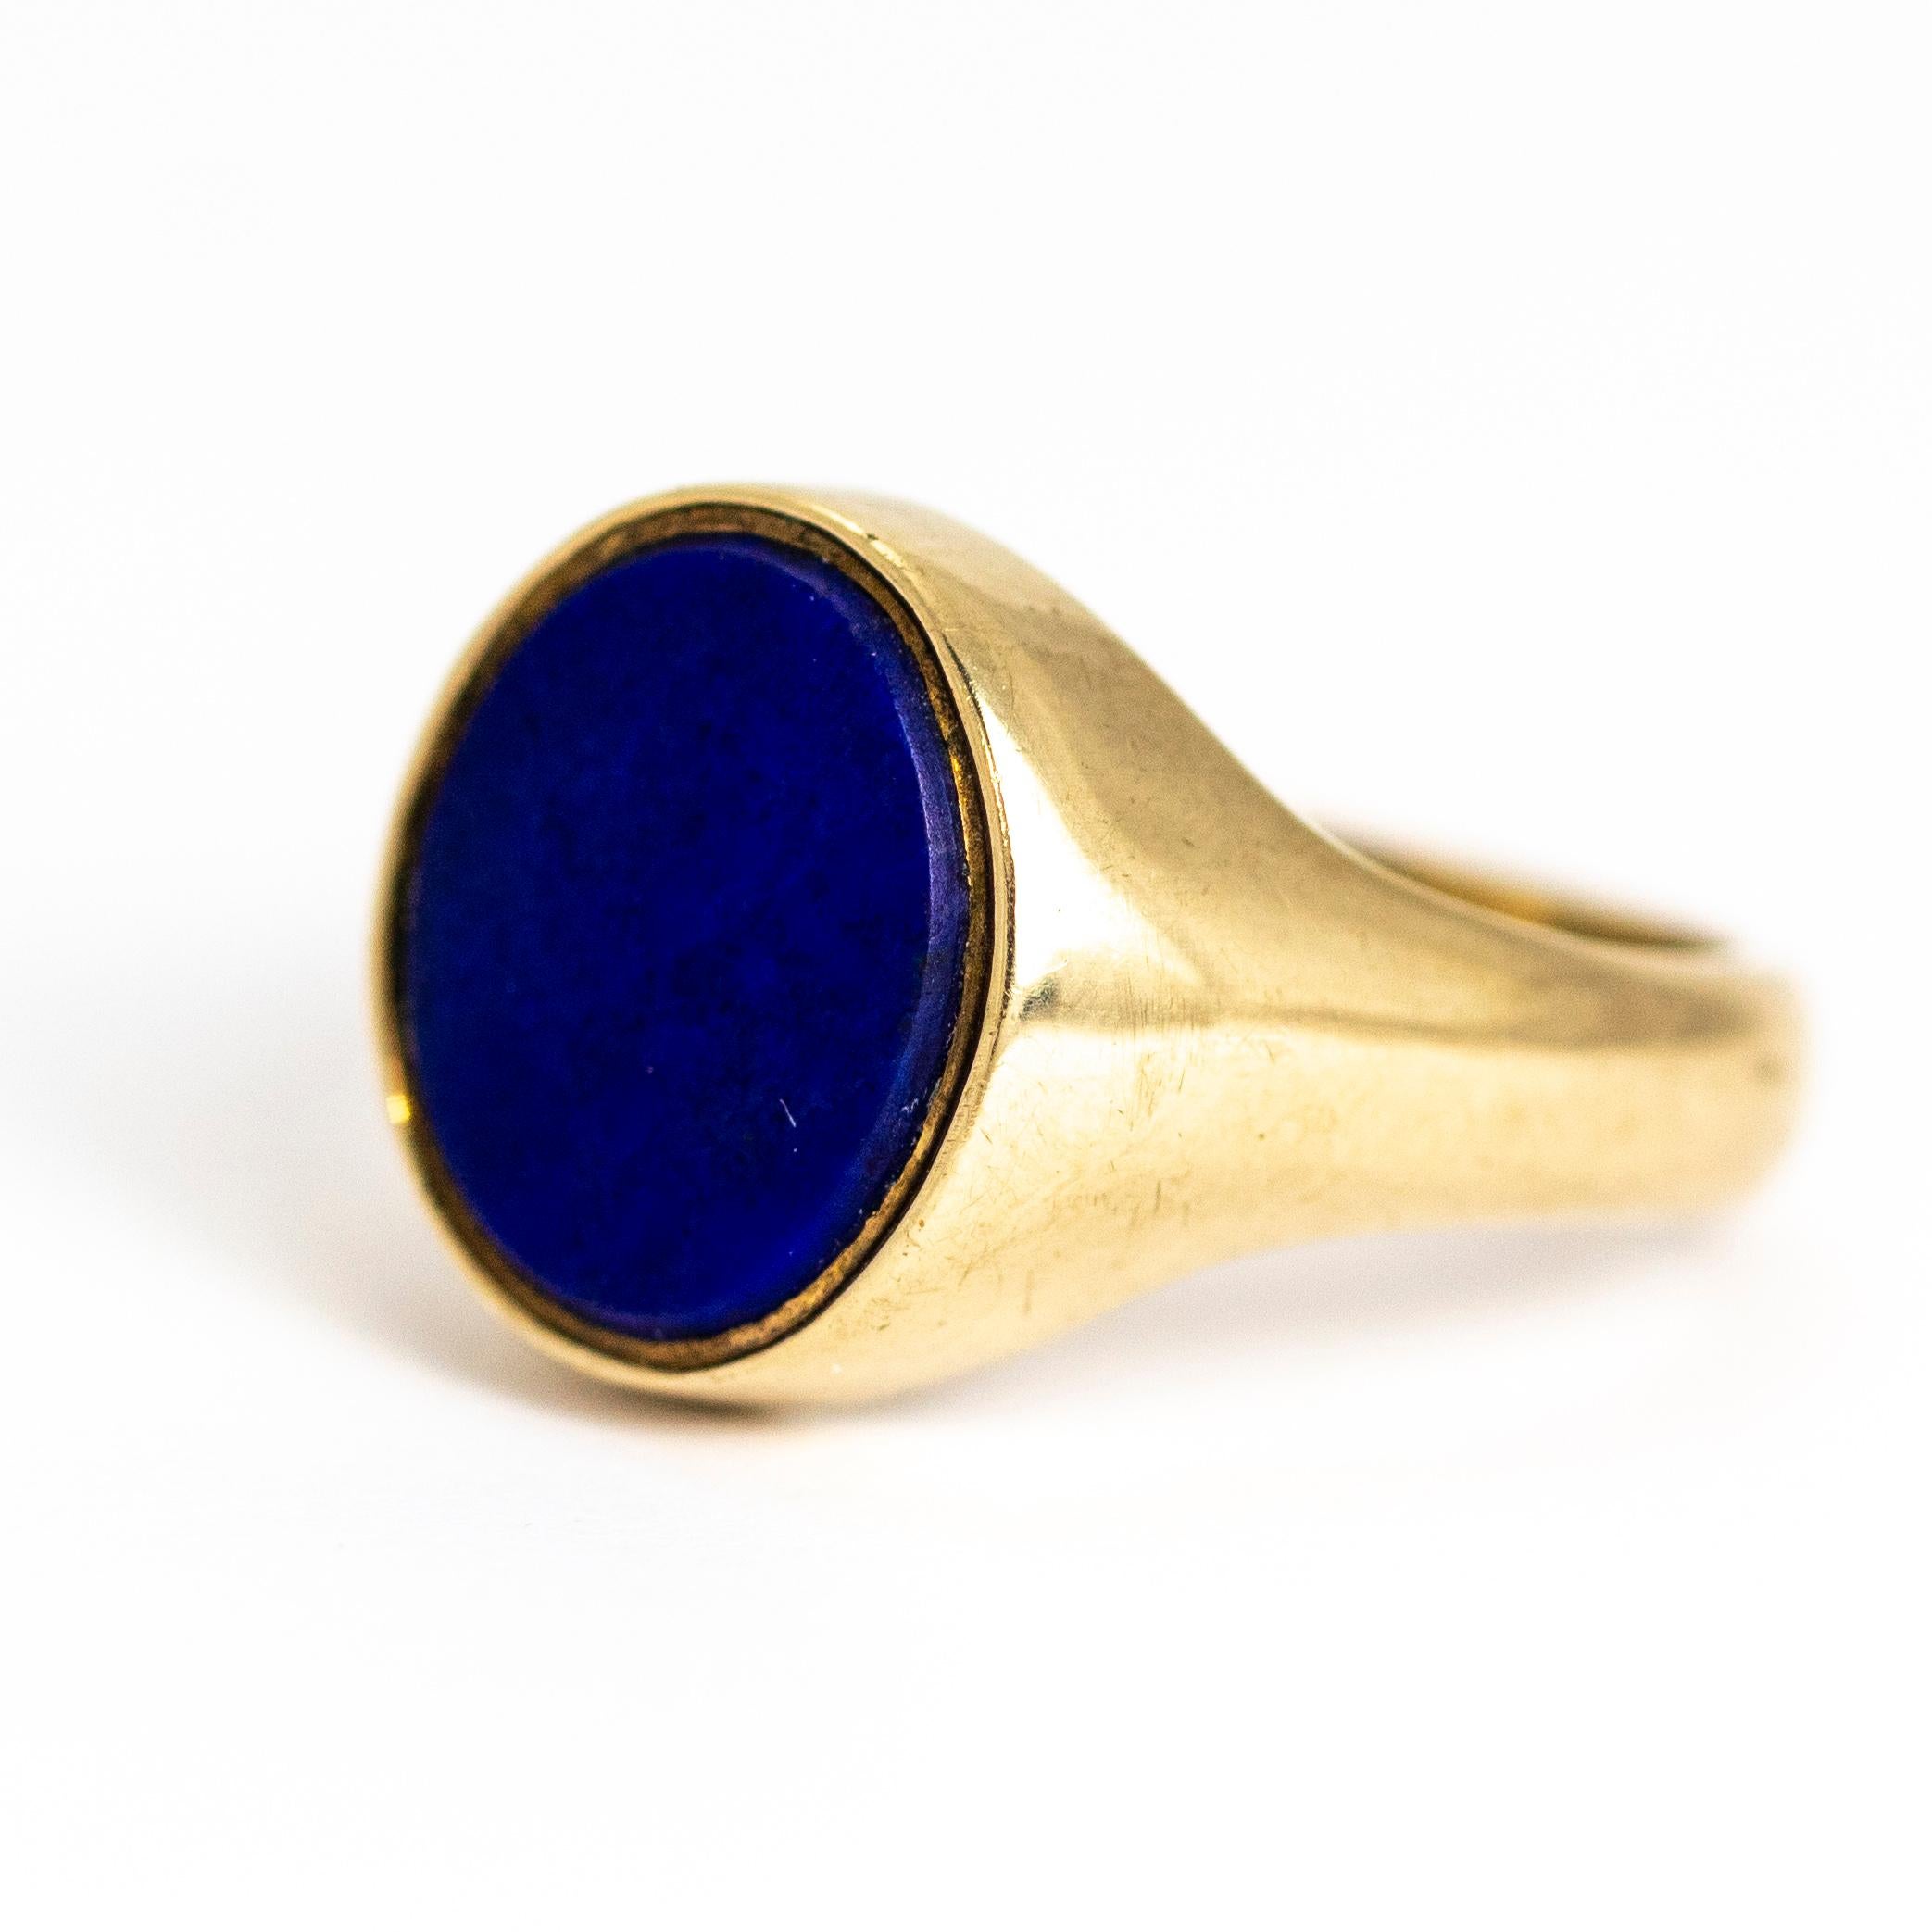 This beautiful, bright blue lapis sits flush in this glossy and chunky 9ct gold signet ring. Made in Birmingham, England.

Ring Size: R or 8 1/2